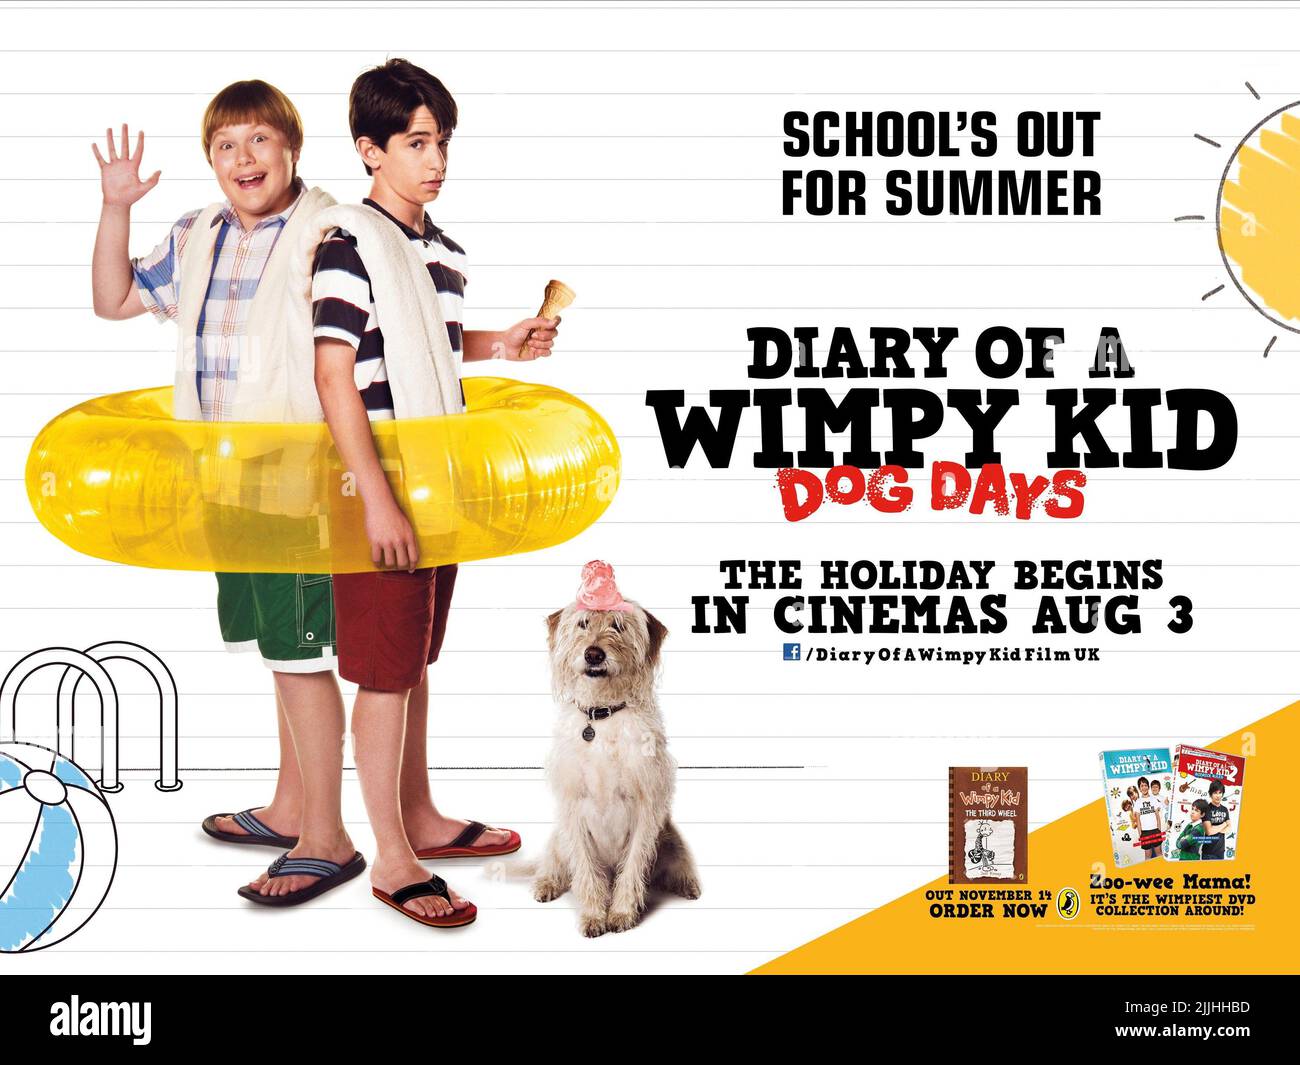 RELEASE DATE: March 19, 2010. MOVIE TITLE: Diary of a Wimpy Kid. STUDIO:  Twentieth Century Fox Films. PLOT: Live-action adaptation of Jeff Kinney's  illustrated novel about a wise-cracking junior high school student.